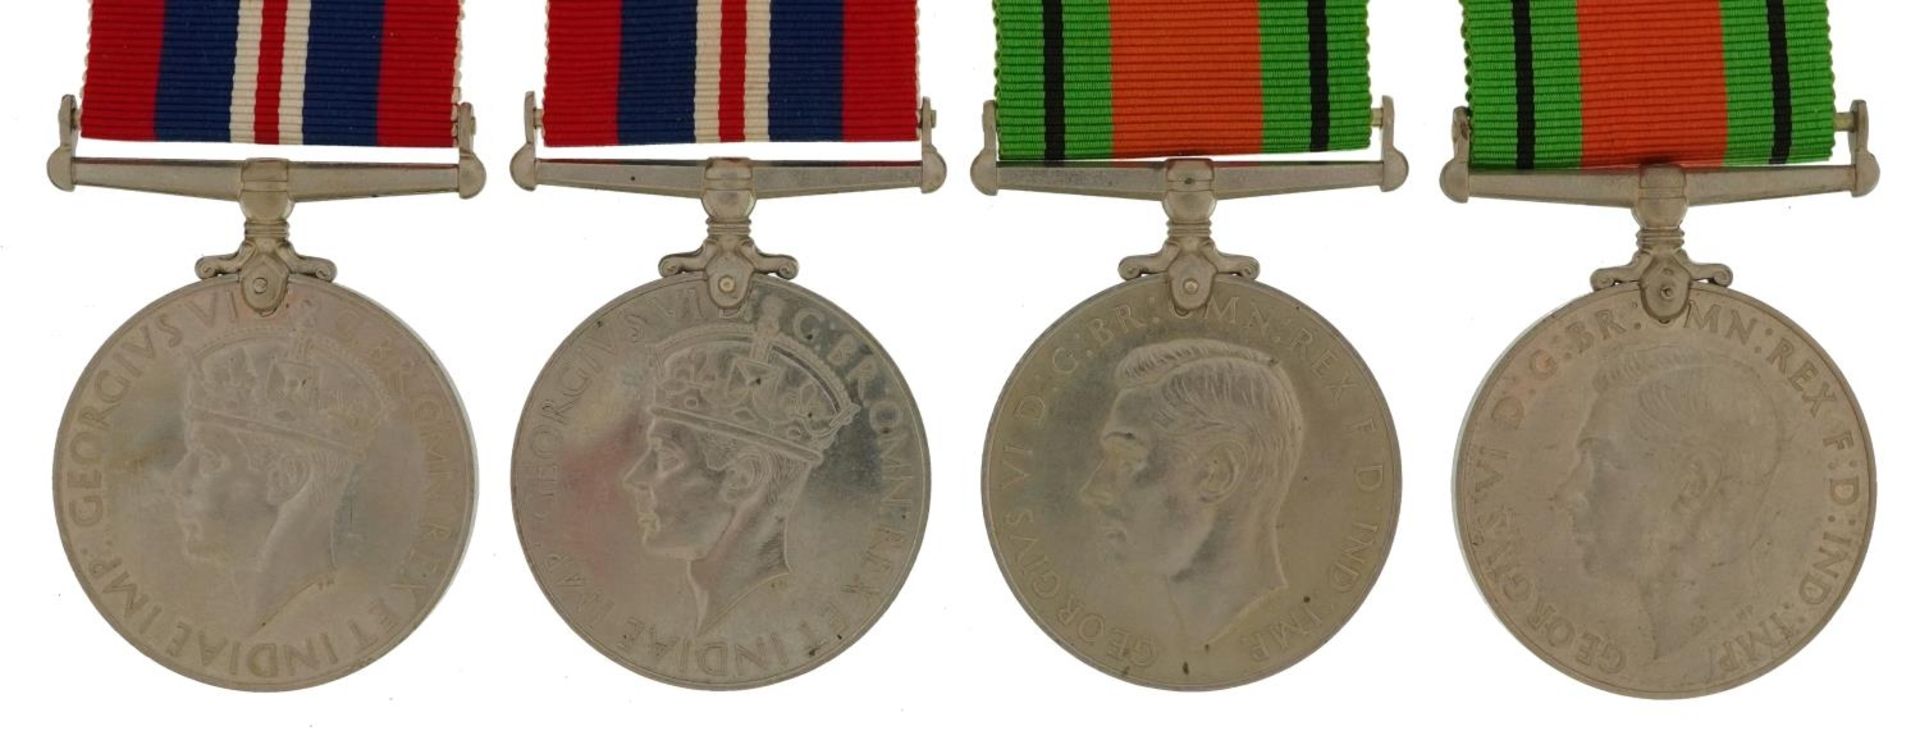 Four British military World War II medals with two boxes of issue : For further information on - Bild 2 aus 3